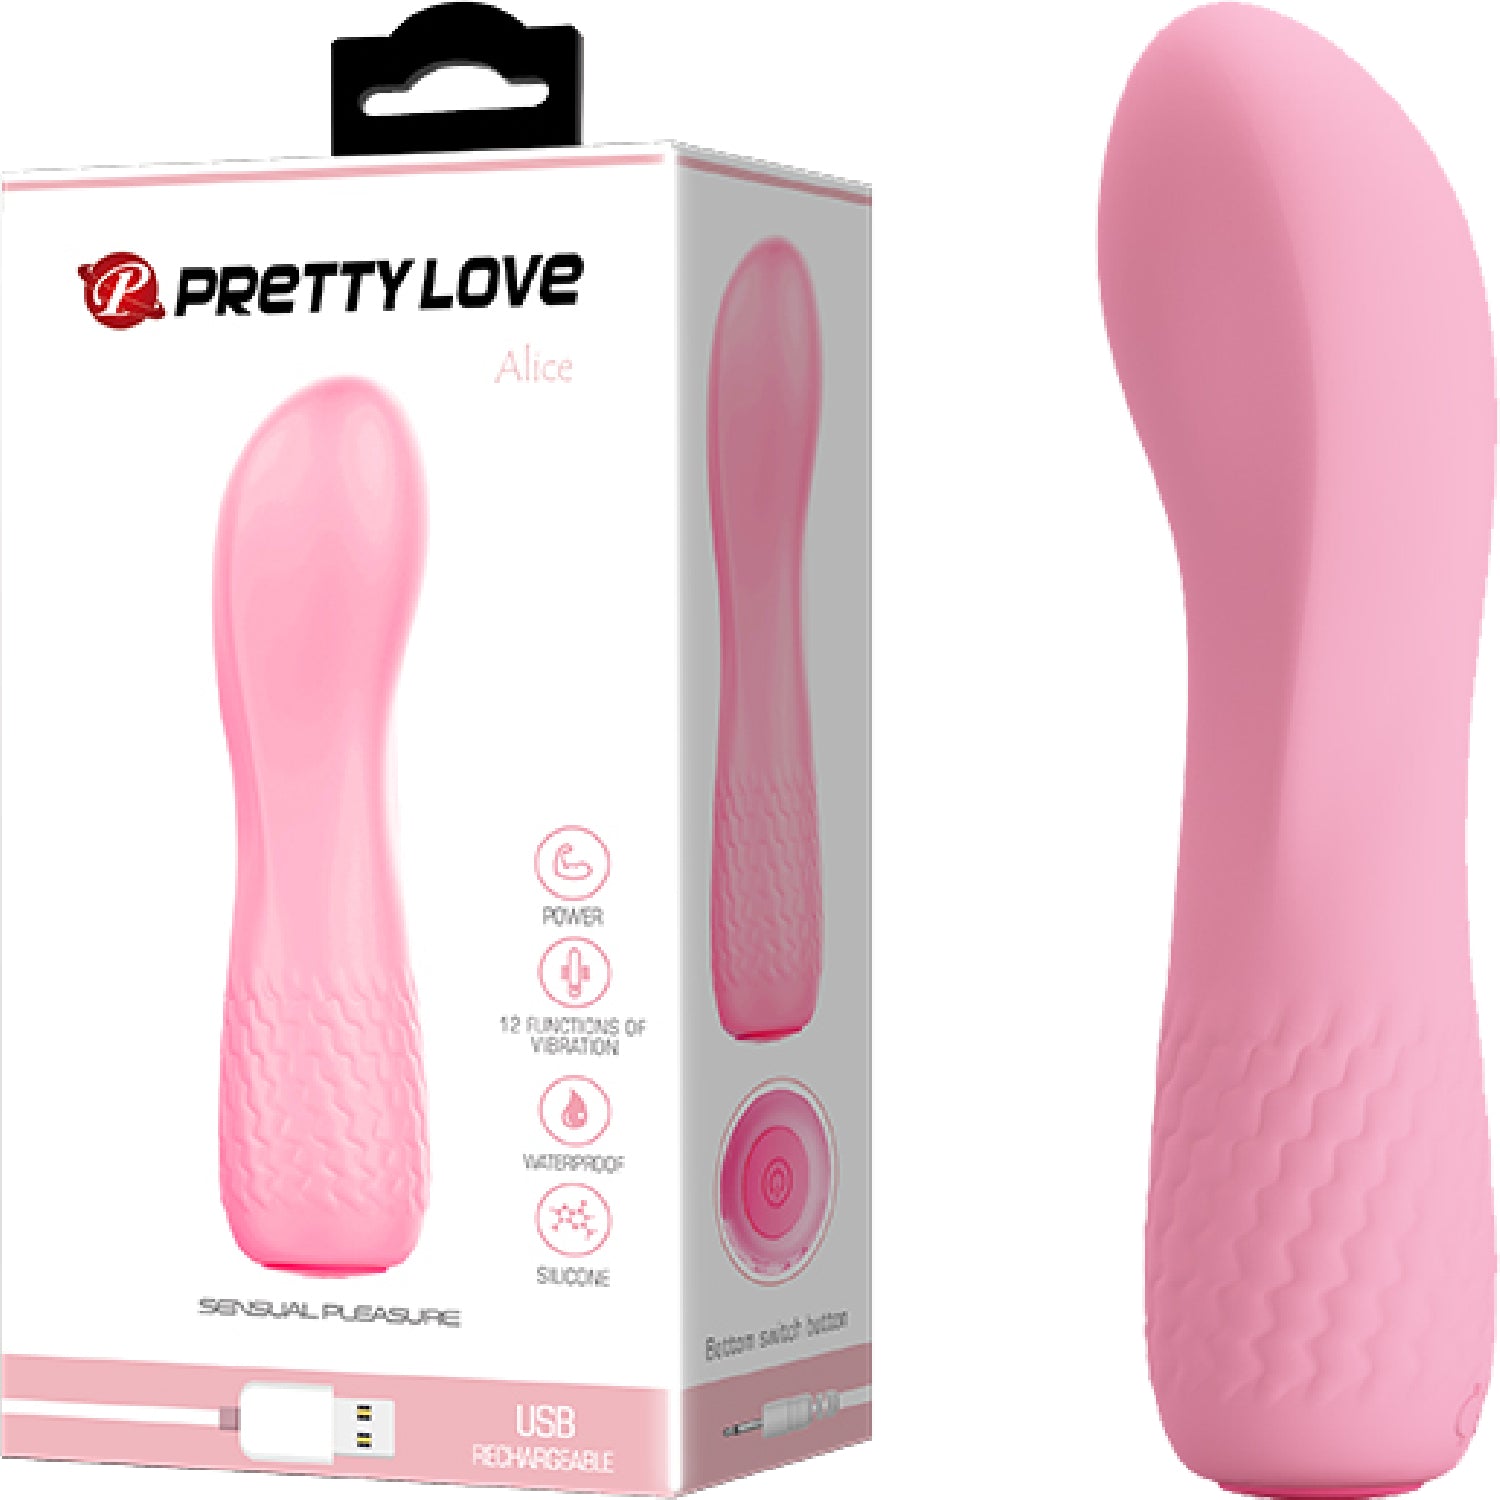 Pretty Love Rechargeable Alice Vibrator Light Pink - Club X